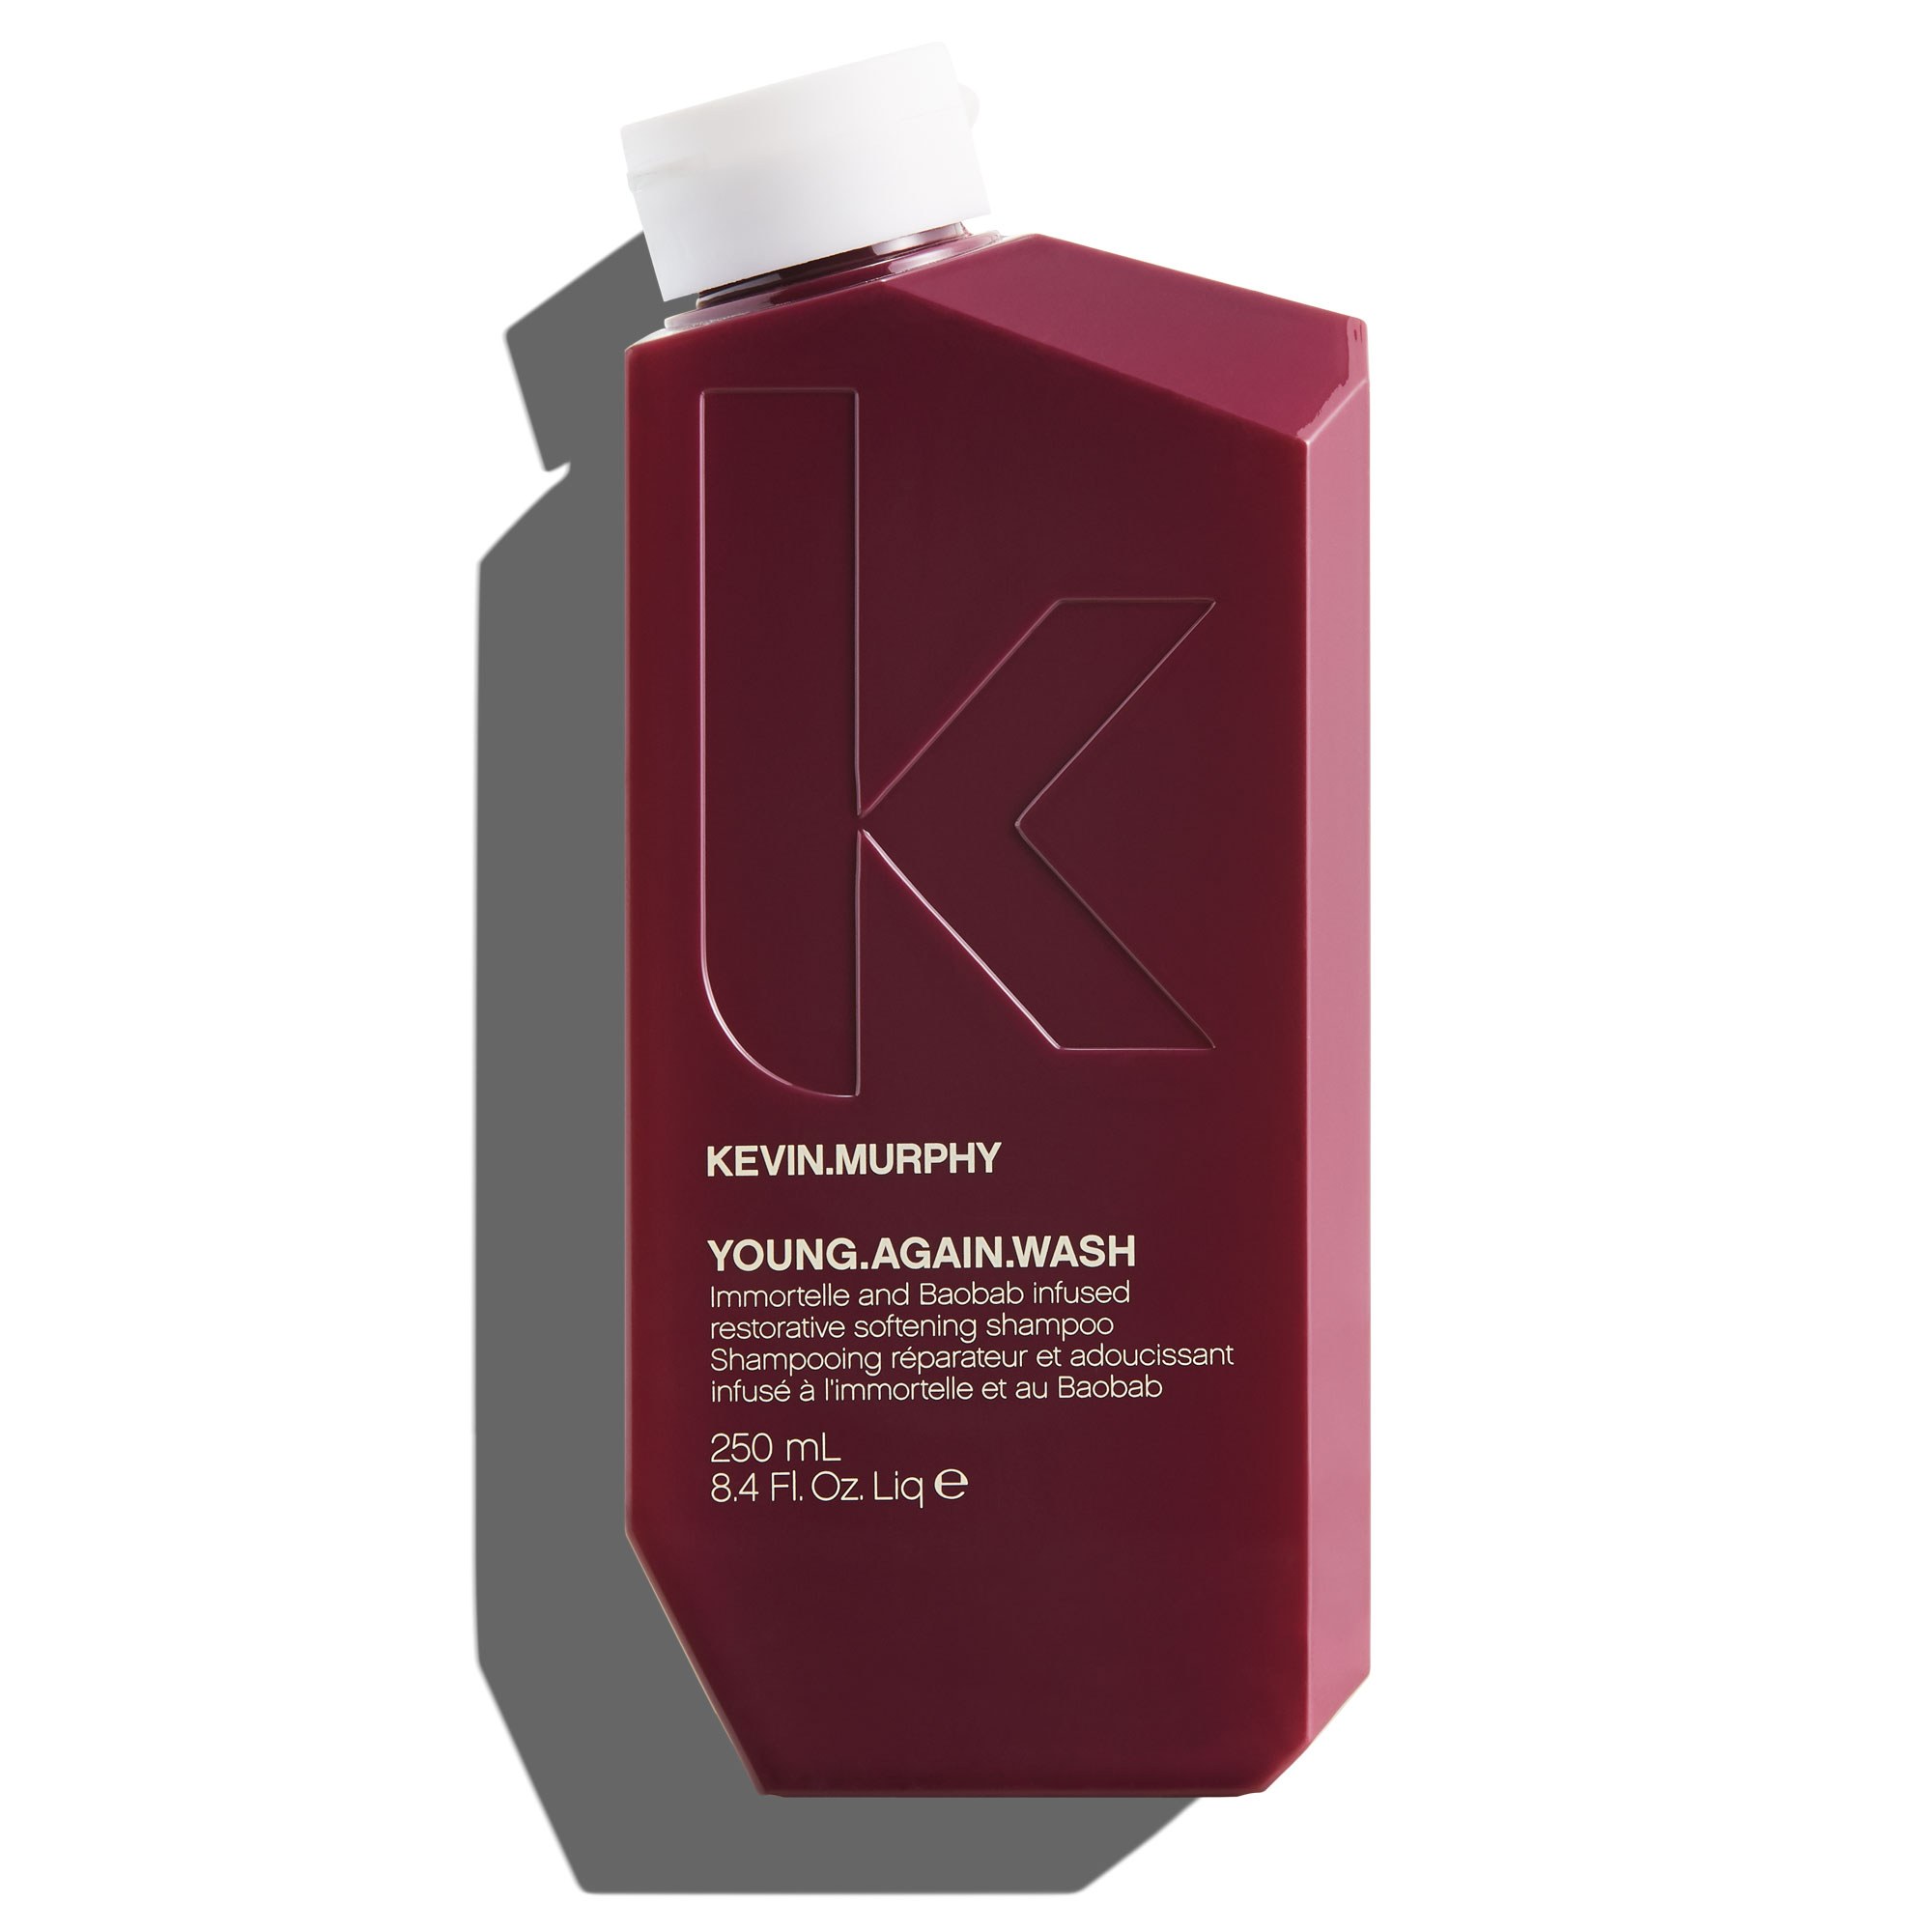 KEVIN.MURPHY YOUNG.AGAIN WASH